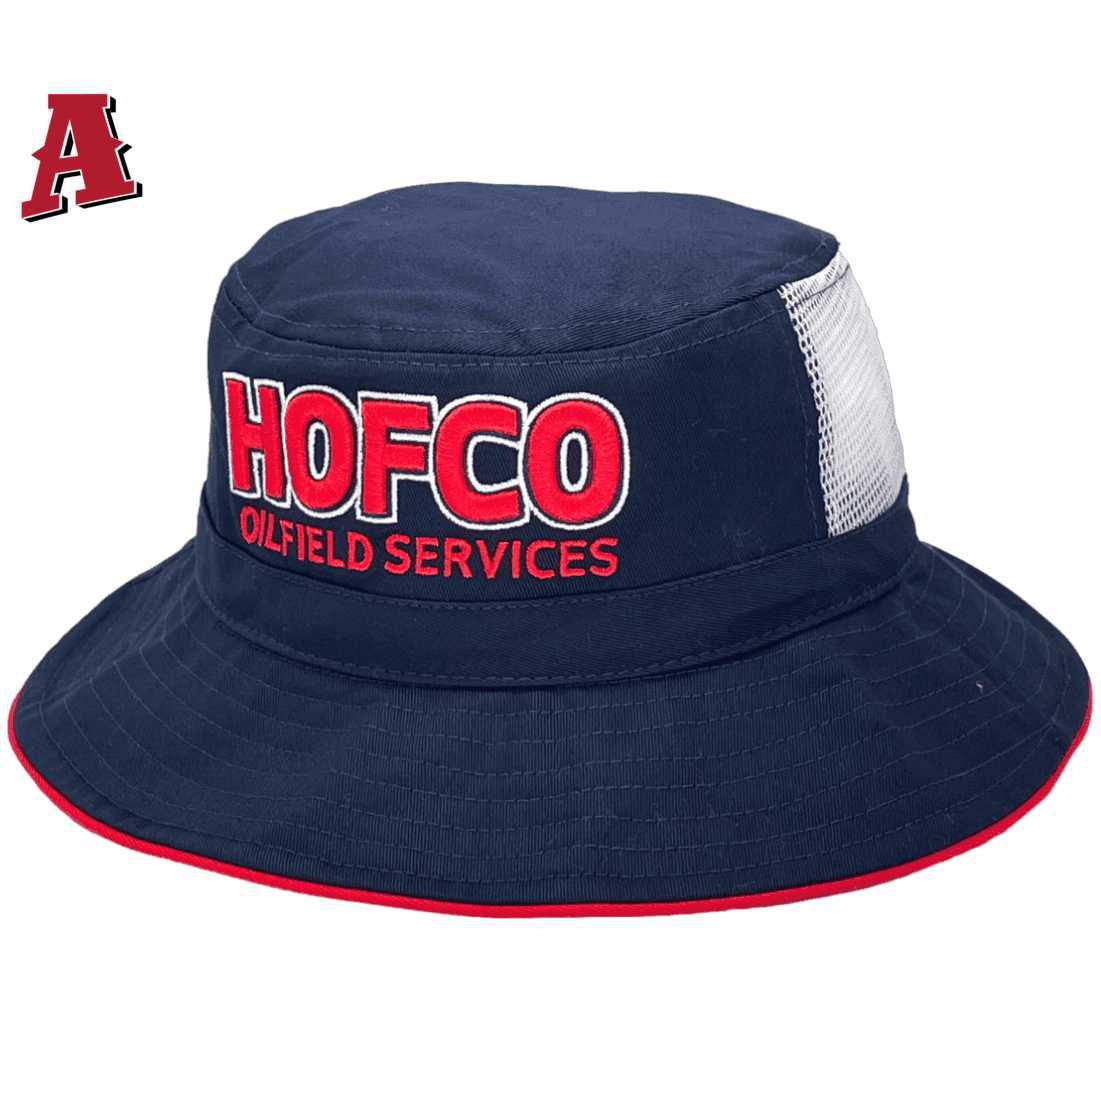 Hofco Oilfield Services Molendinar Qld Aussie Bucket Hat One Size Fits All with Adjustable Toggle Crown and Optional Brim Size from 5cm to 7.5cm